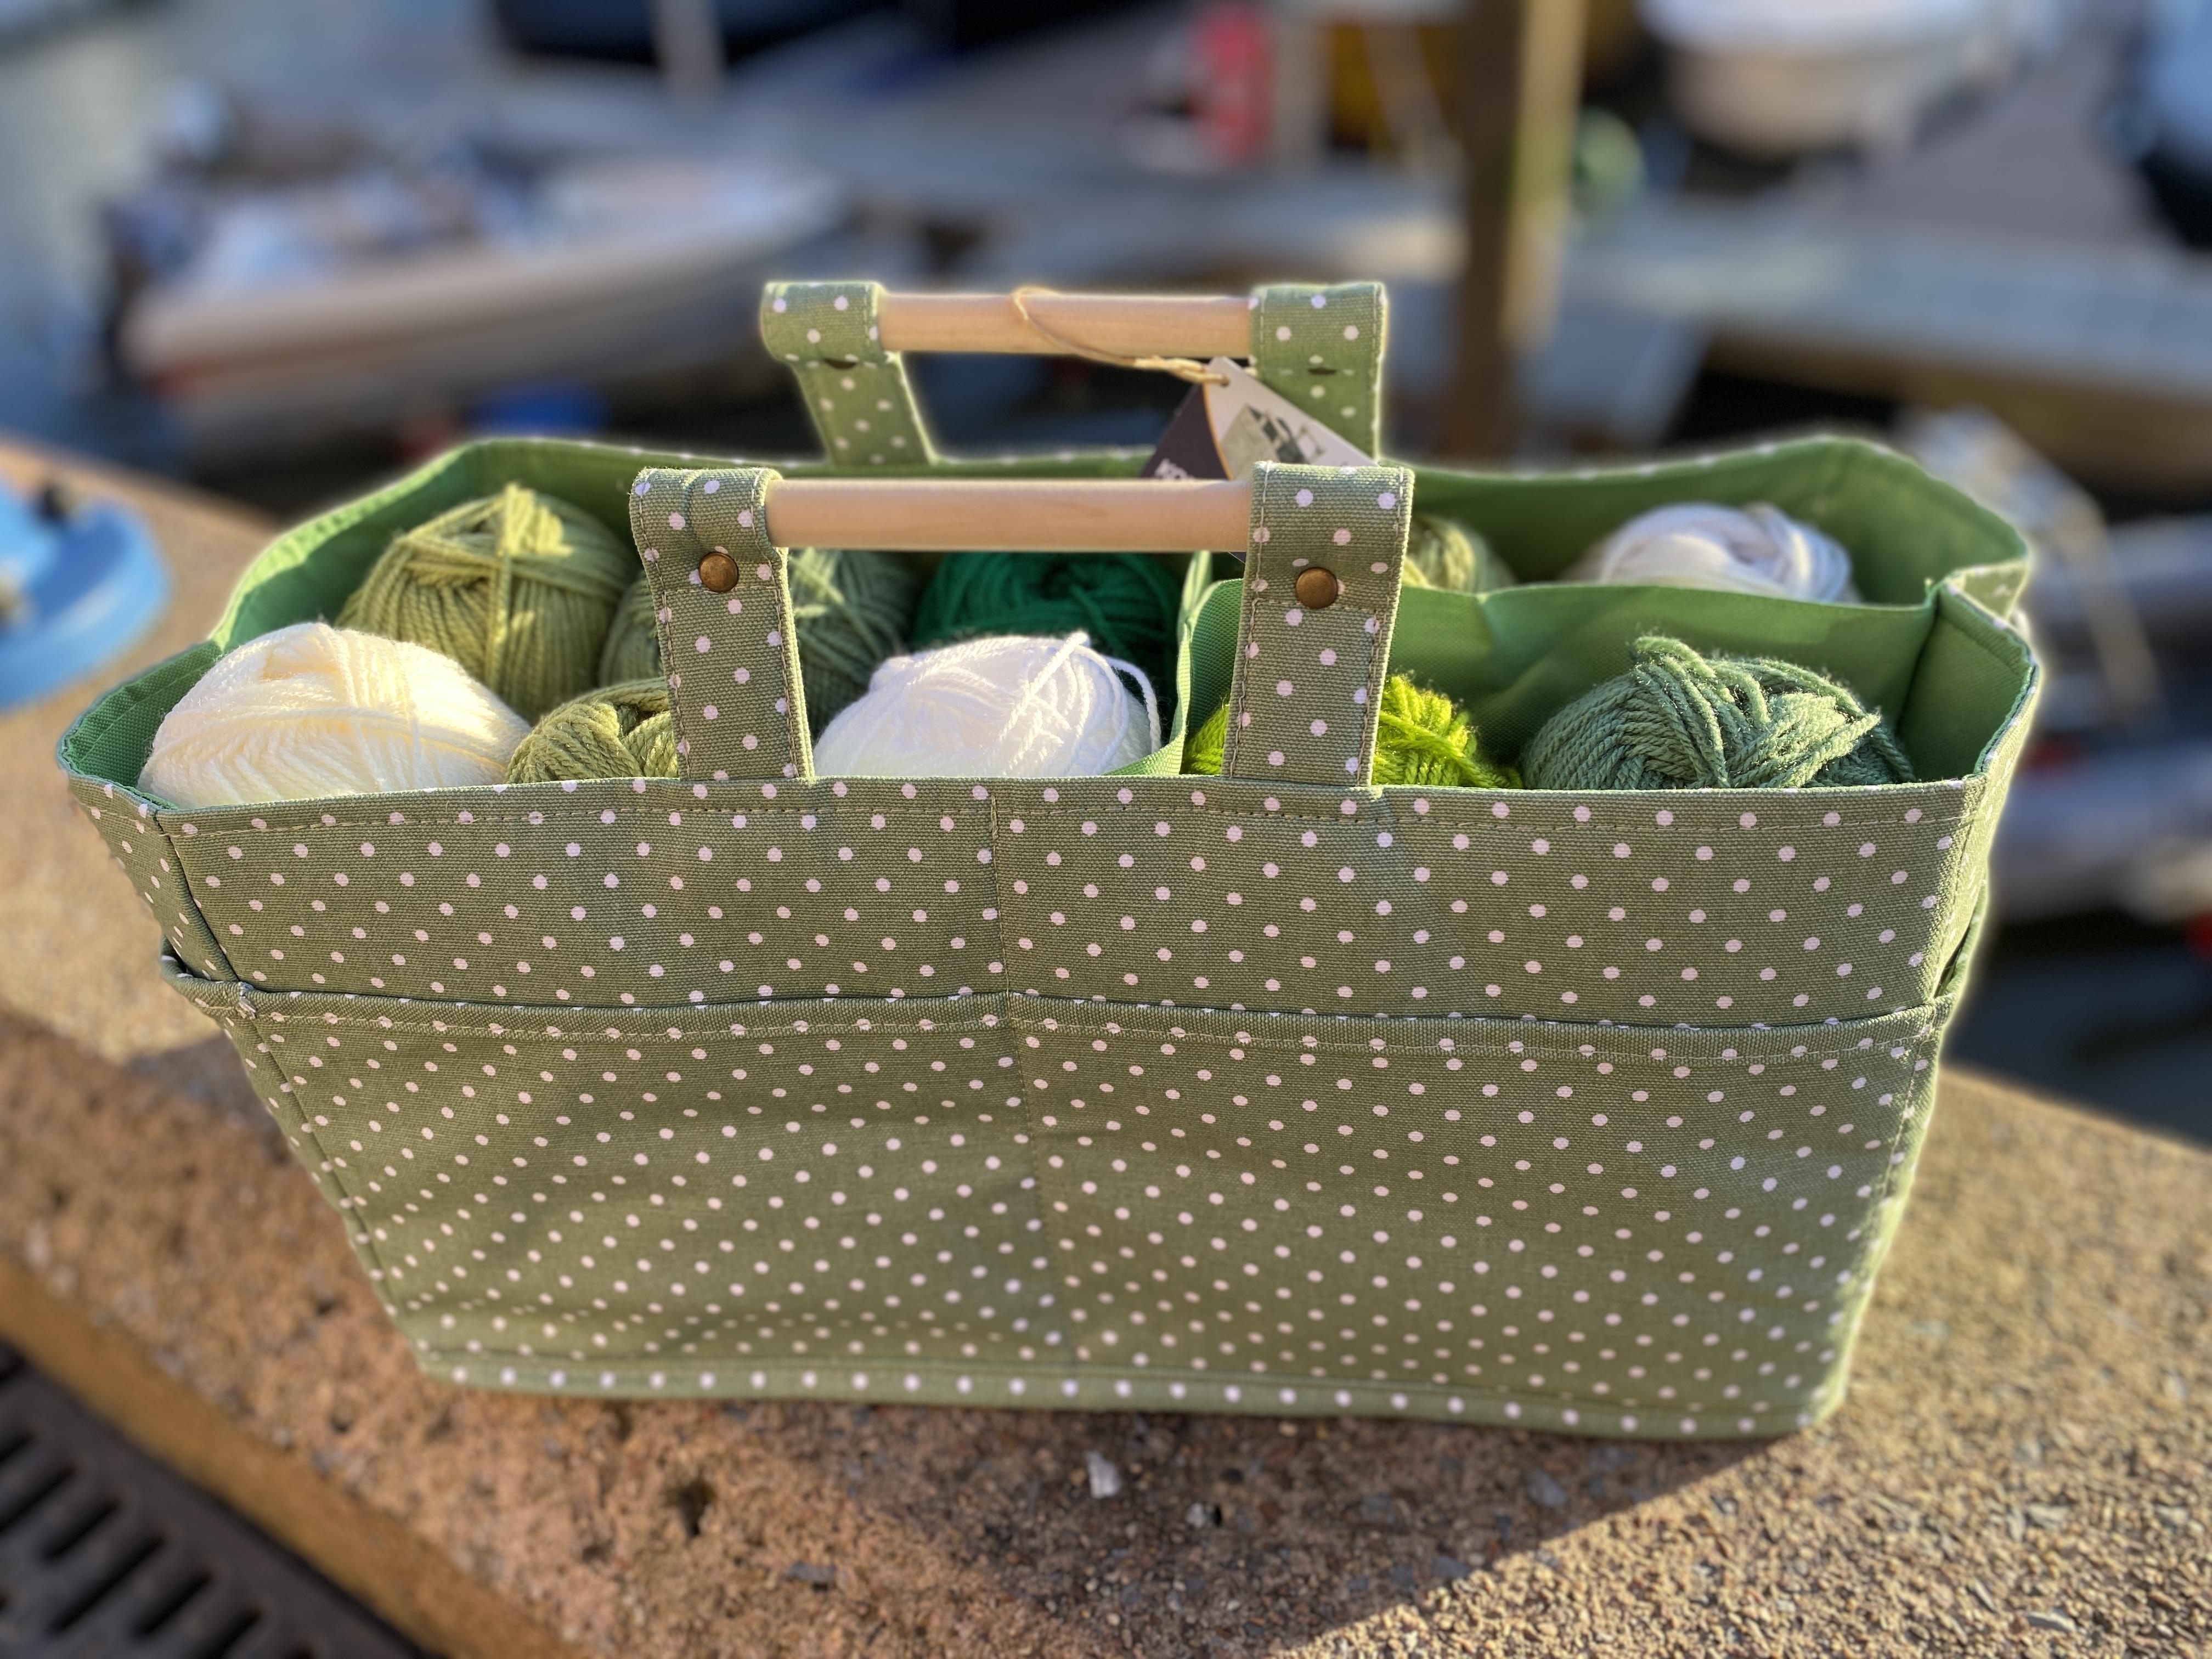 sage green carry tote full of yarn